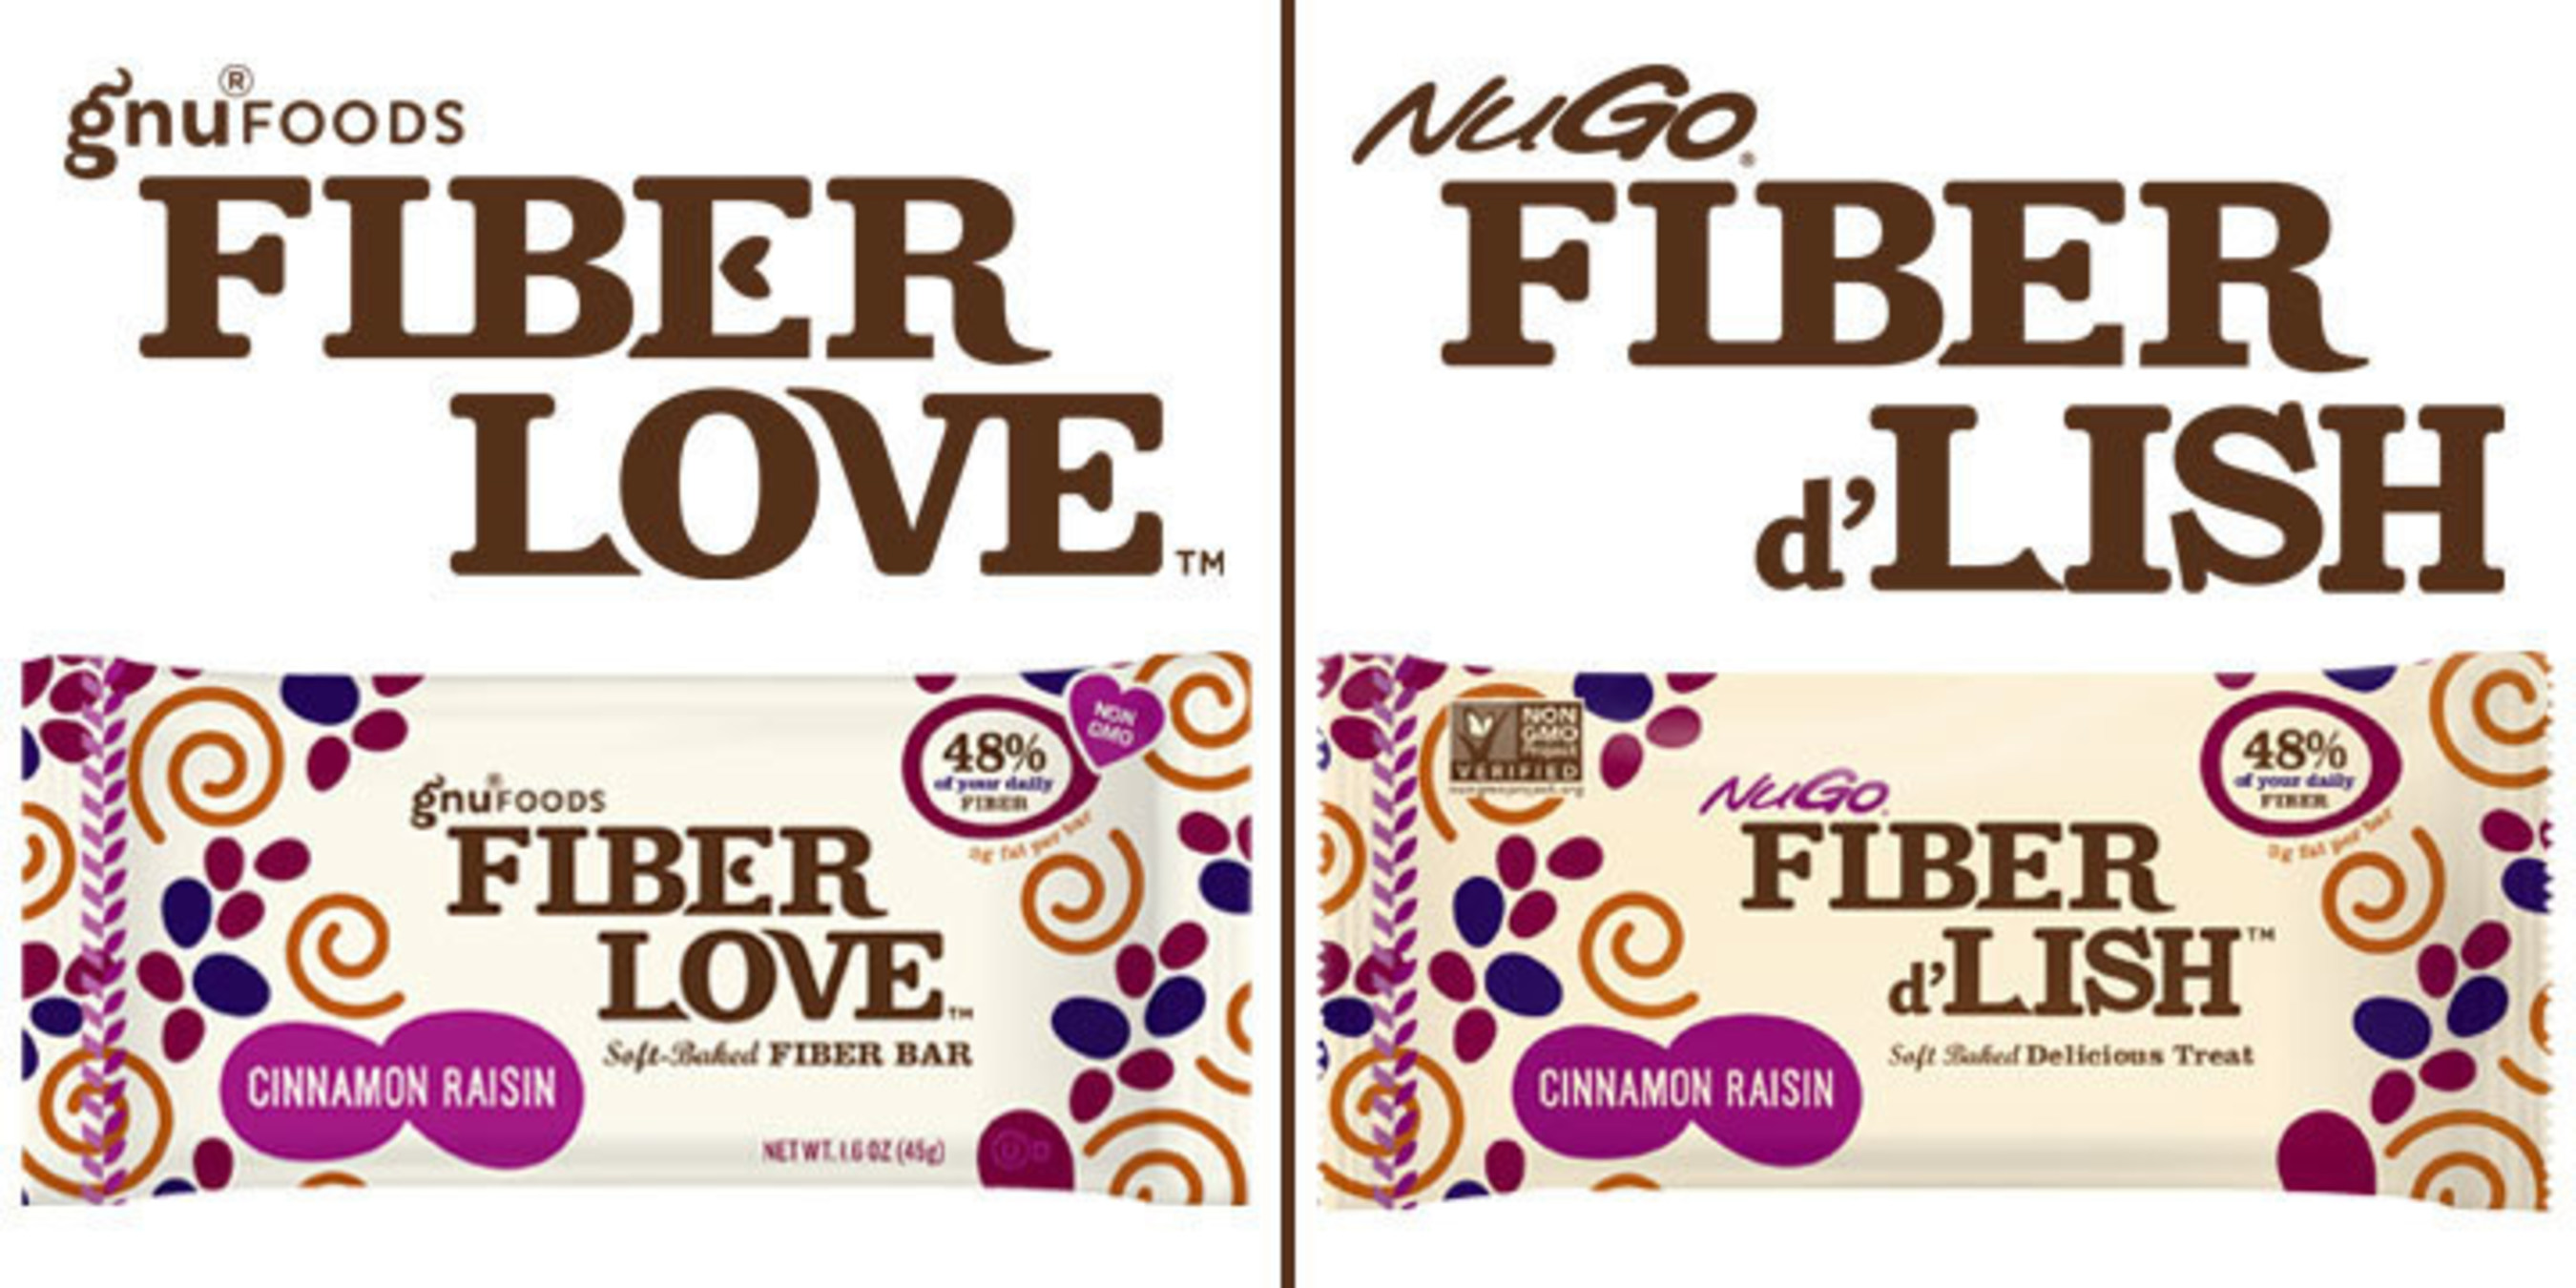 NuGo Nutrition acquires Gnu Foods Fiber Love. New name of Fiber d'Lish, with the same soft-baked, delicious recipe. Fiber with the taste you crave.